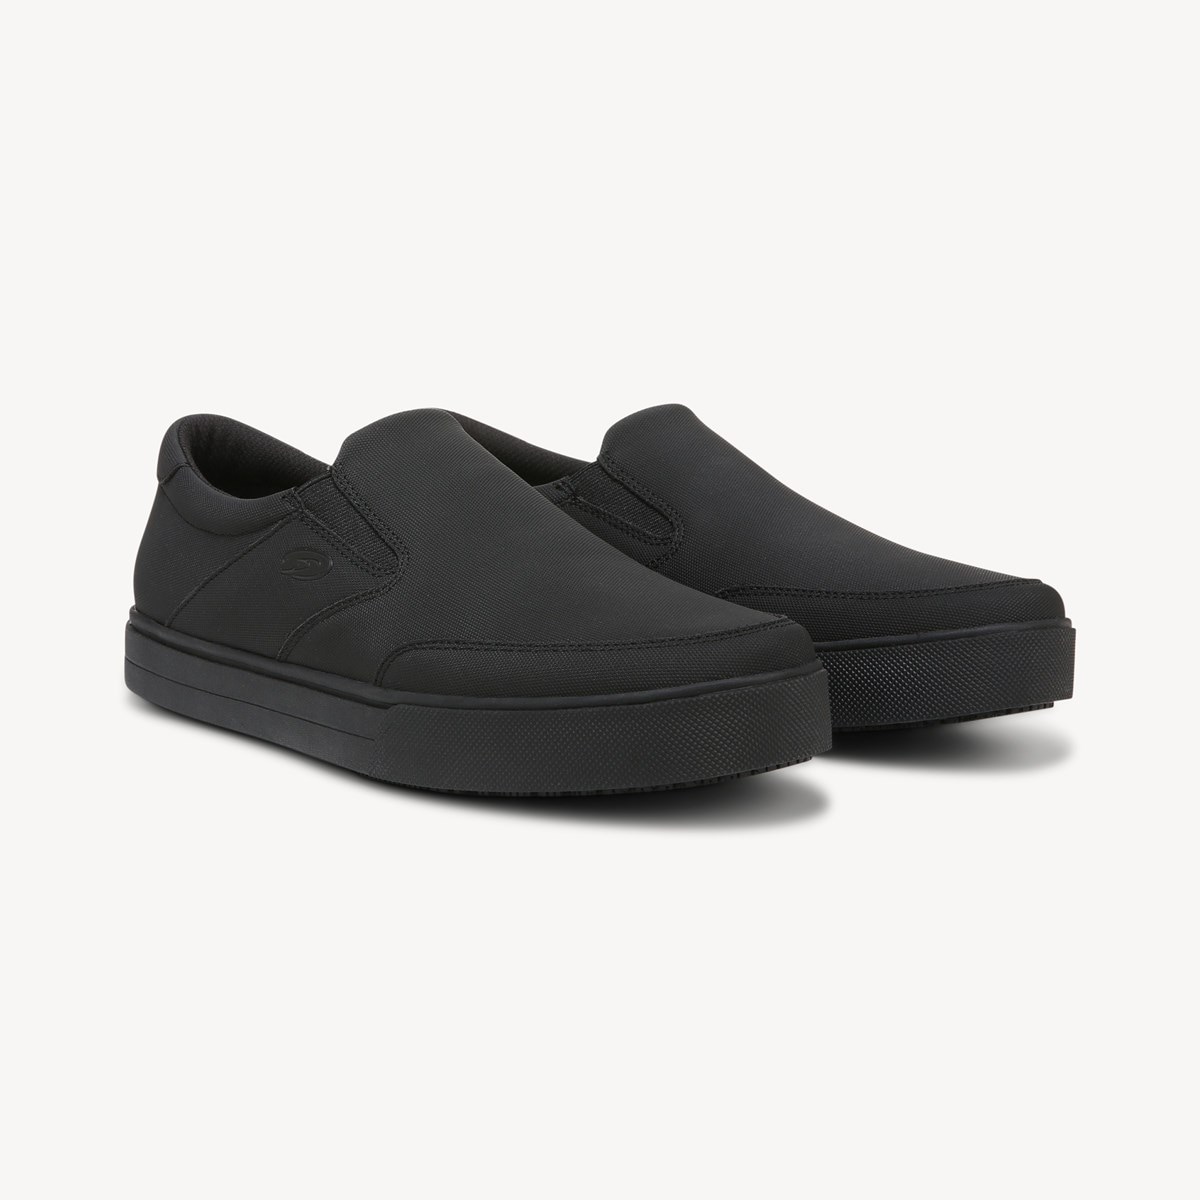 are skate shoes slip resistant